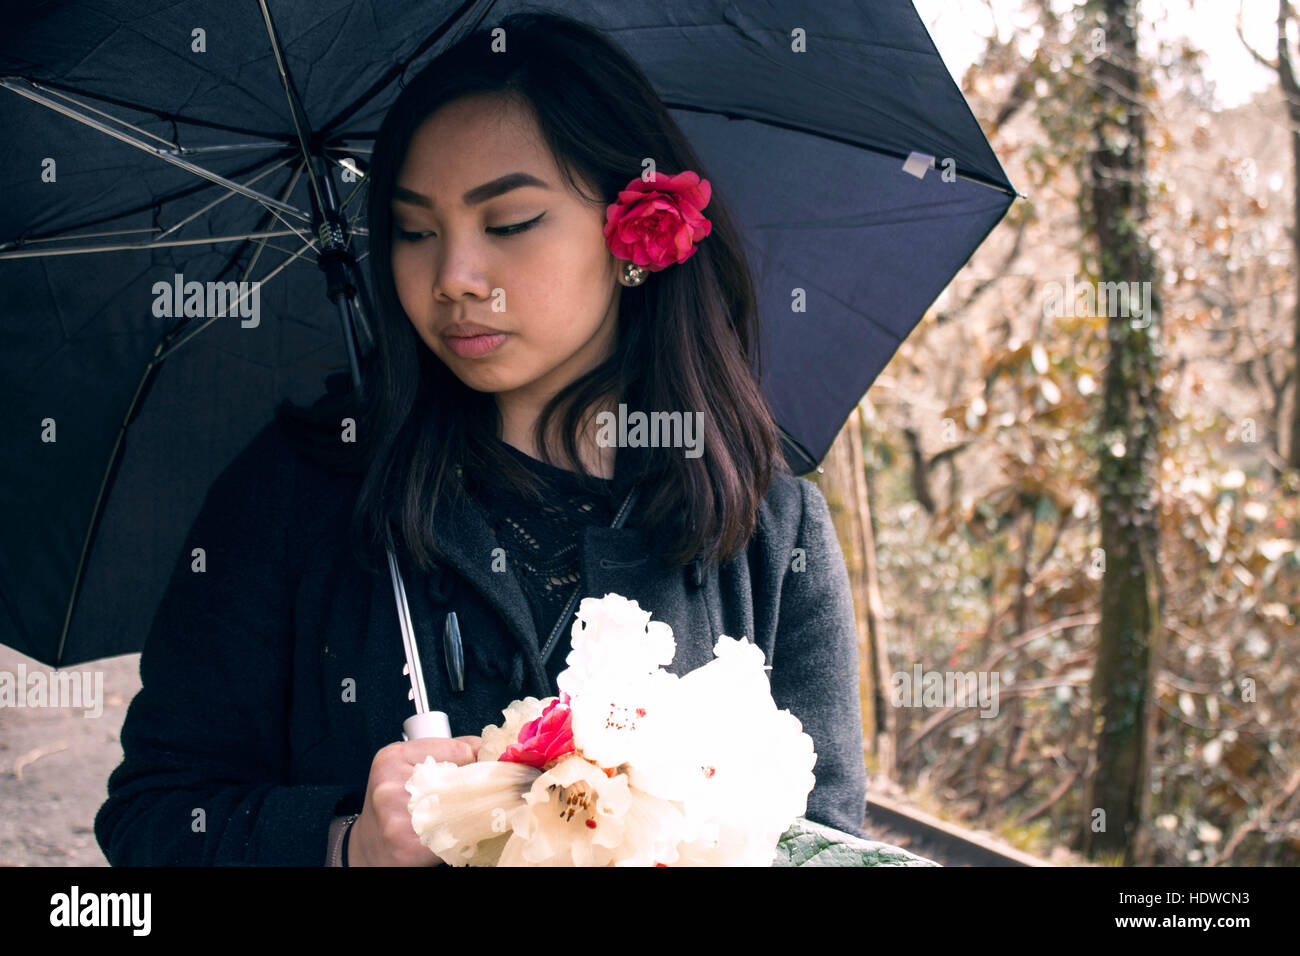 A young girl under an umbrella holding flowers Stock Photo